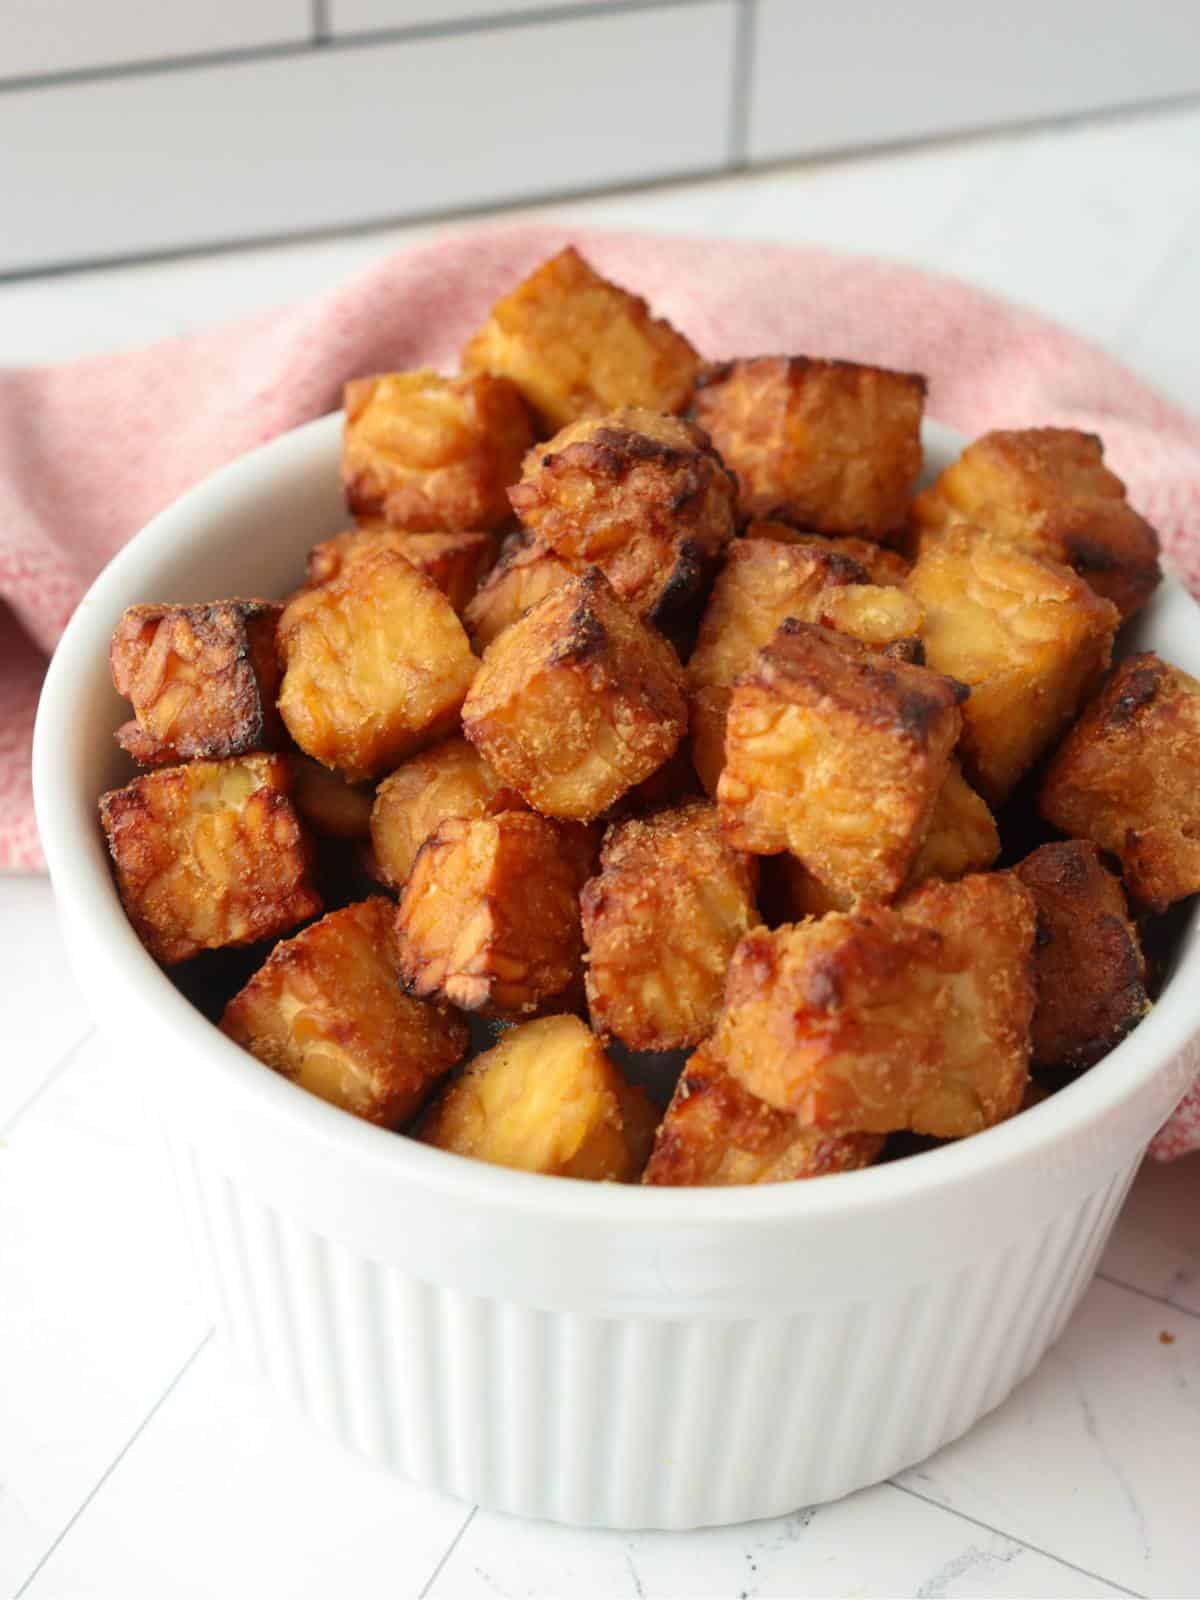 Marinated and air fried tempeh cubes in a white ceramic bowl.